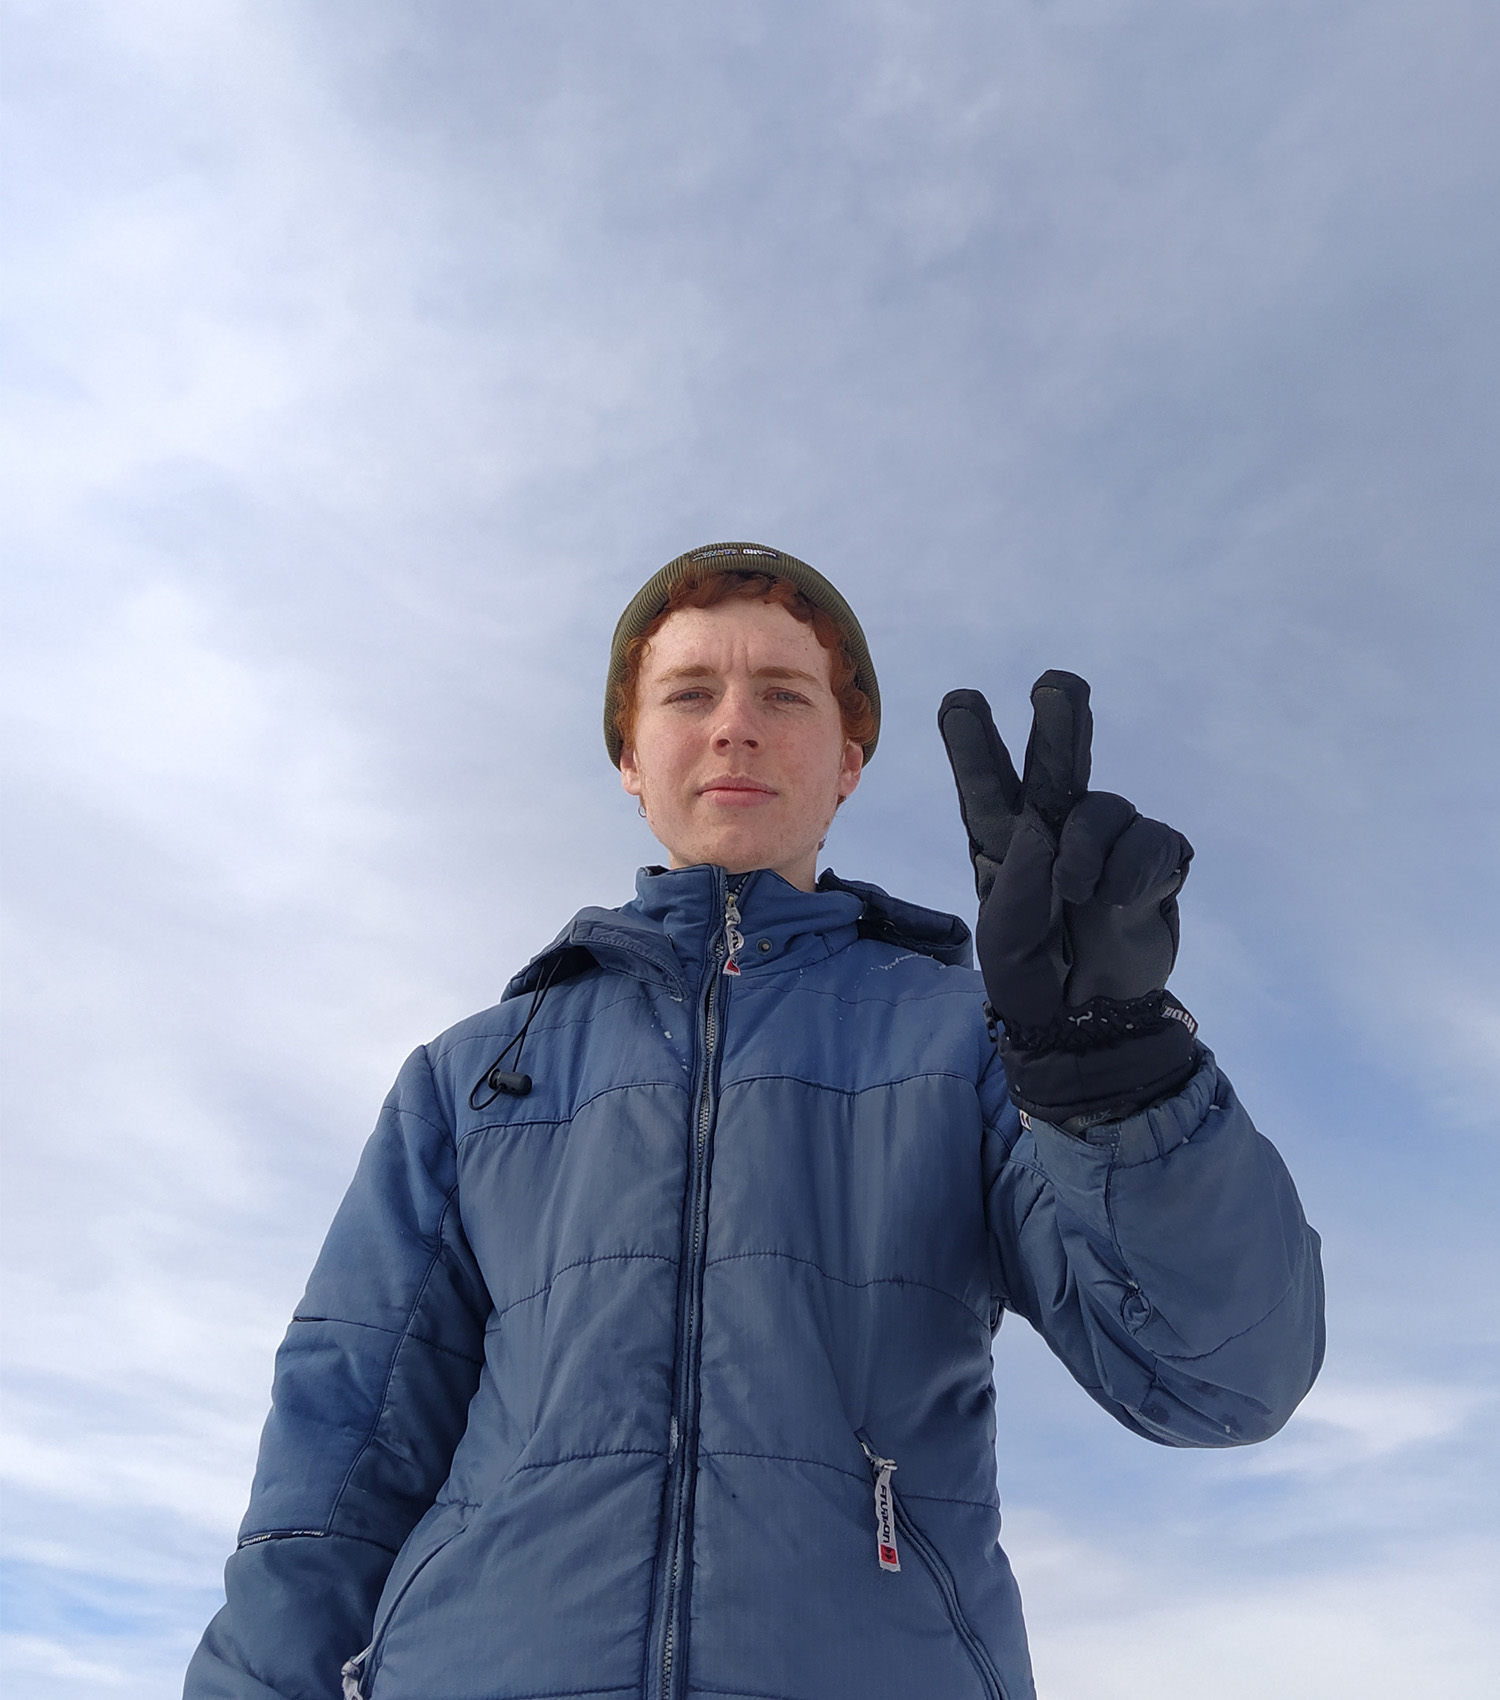 photograph of me in winter-wear holding up the peace sign